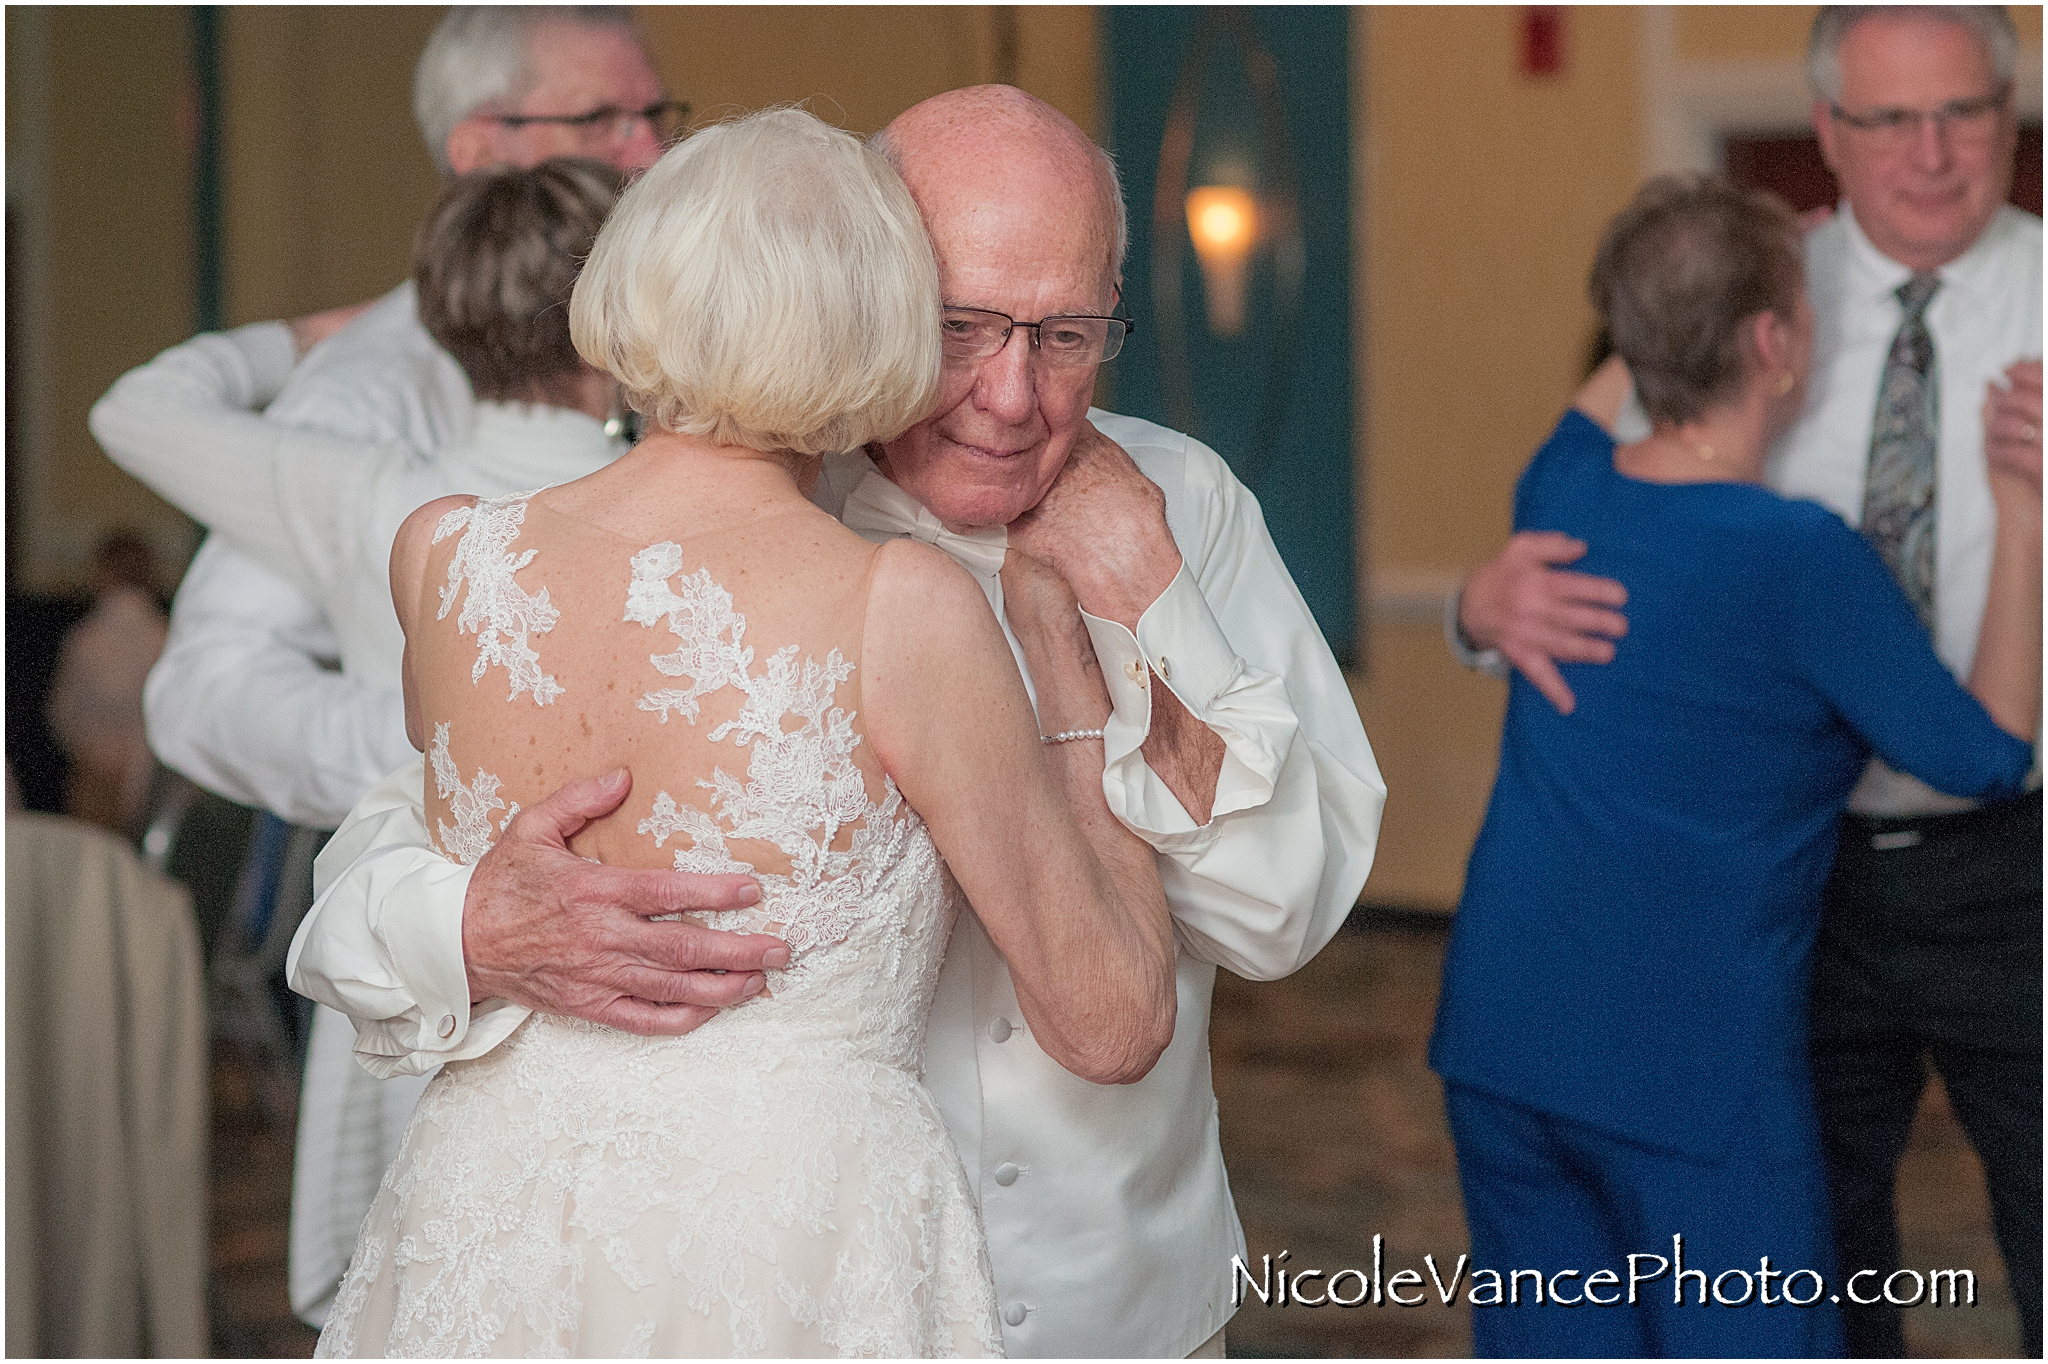 The bride and groom enjoy their last dance at the Doubletree by Hilton Richmond - Midlothian.